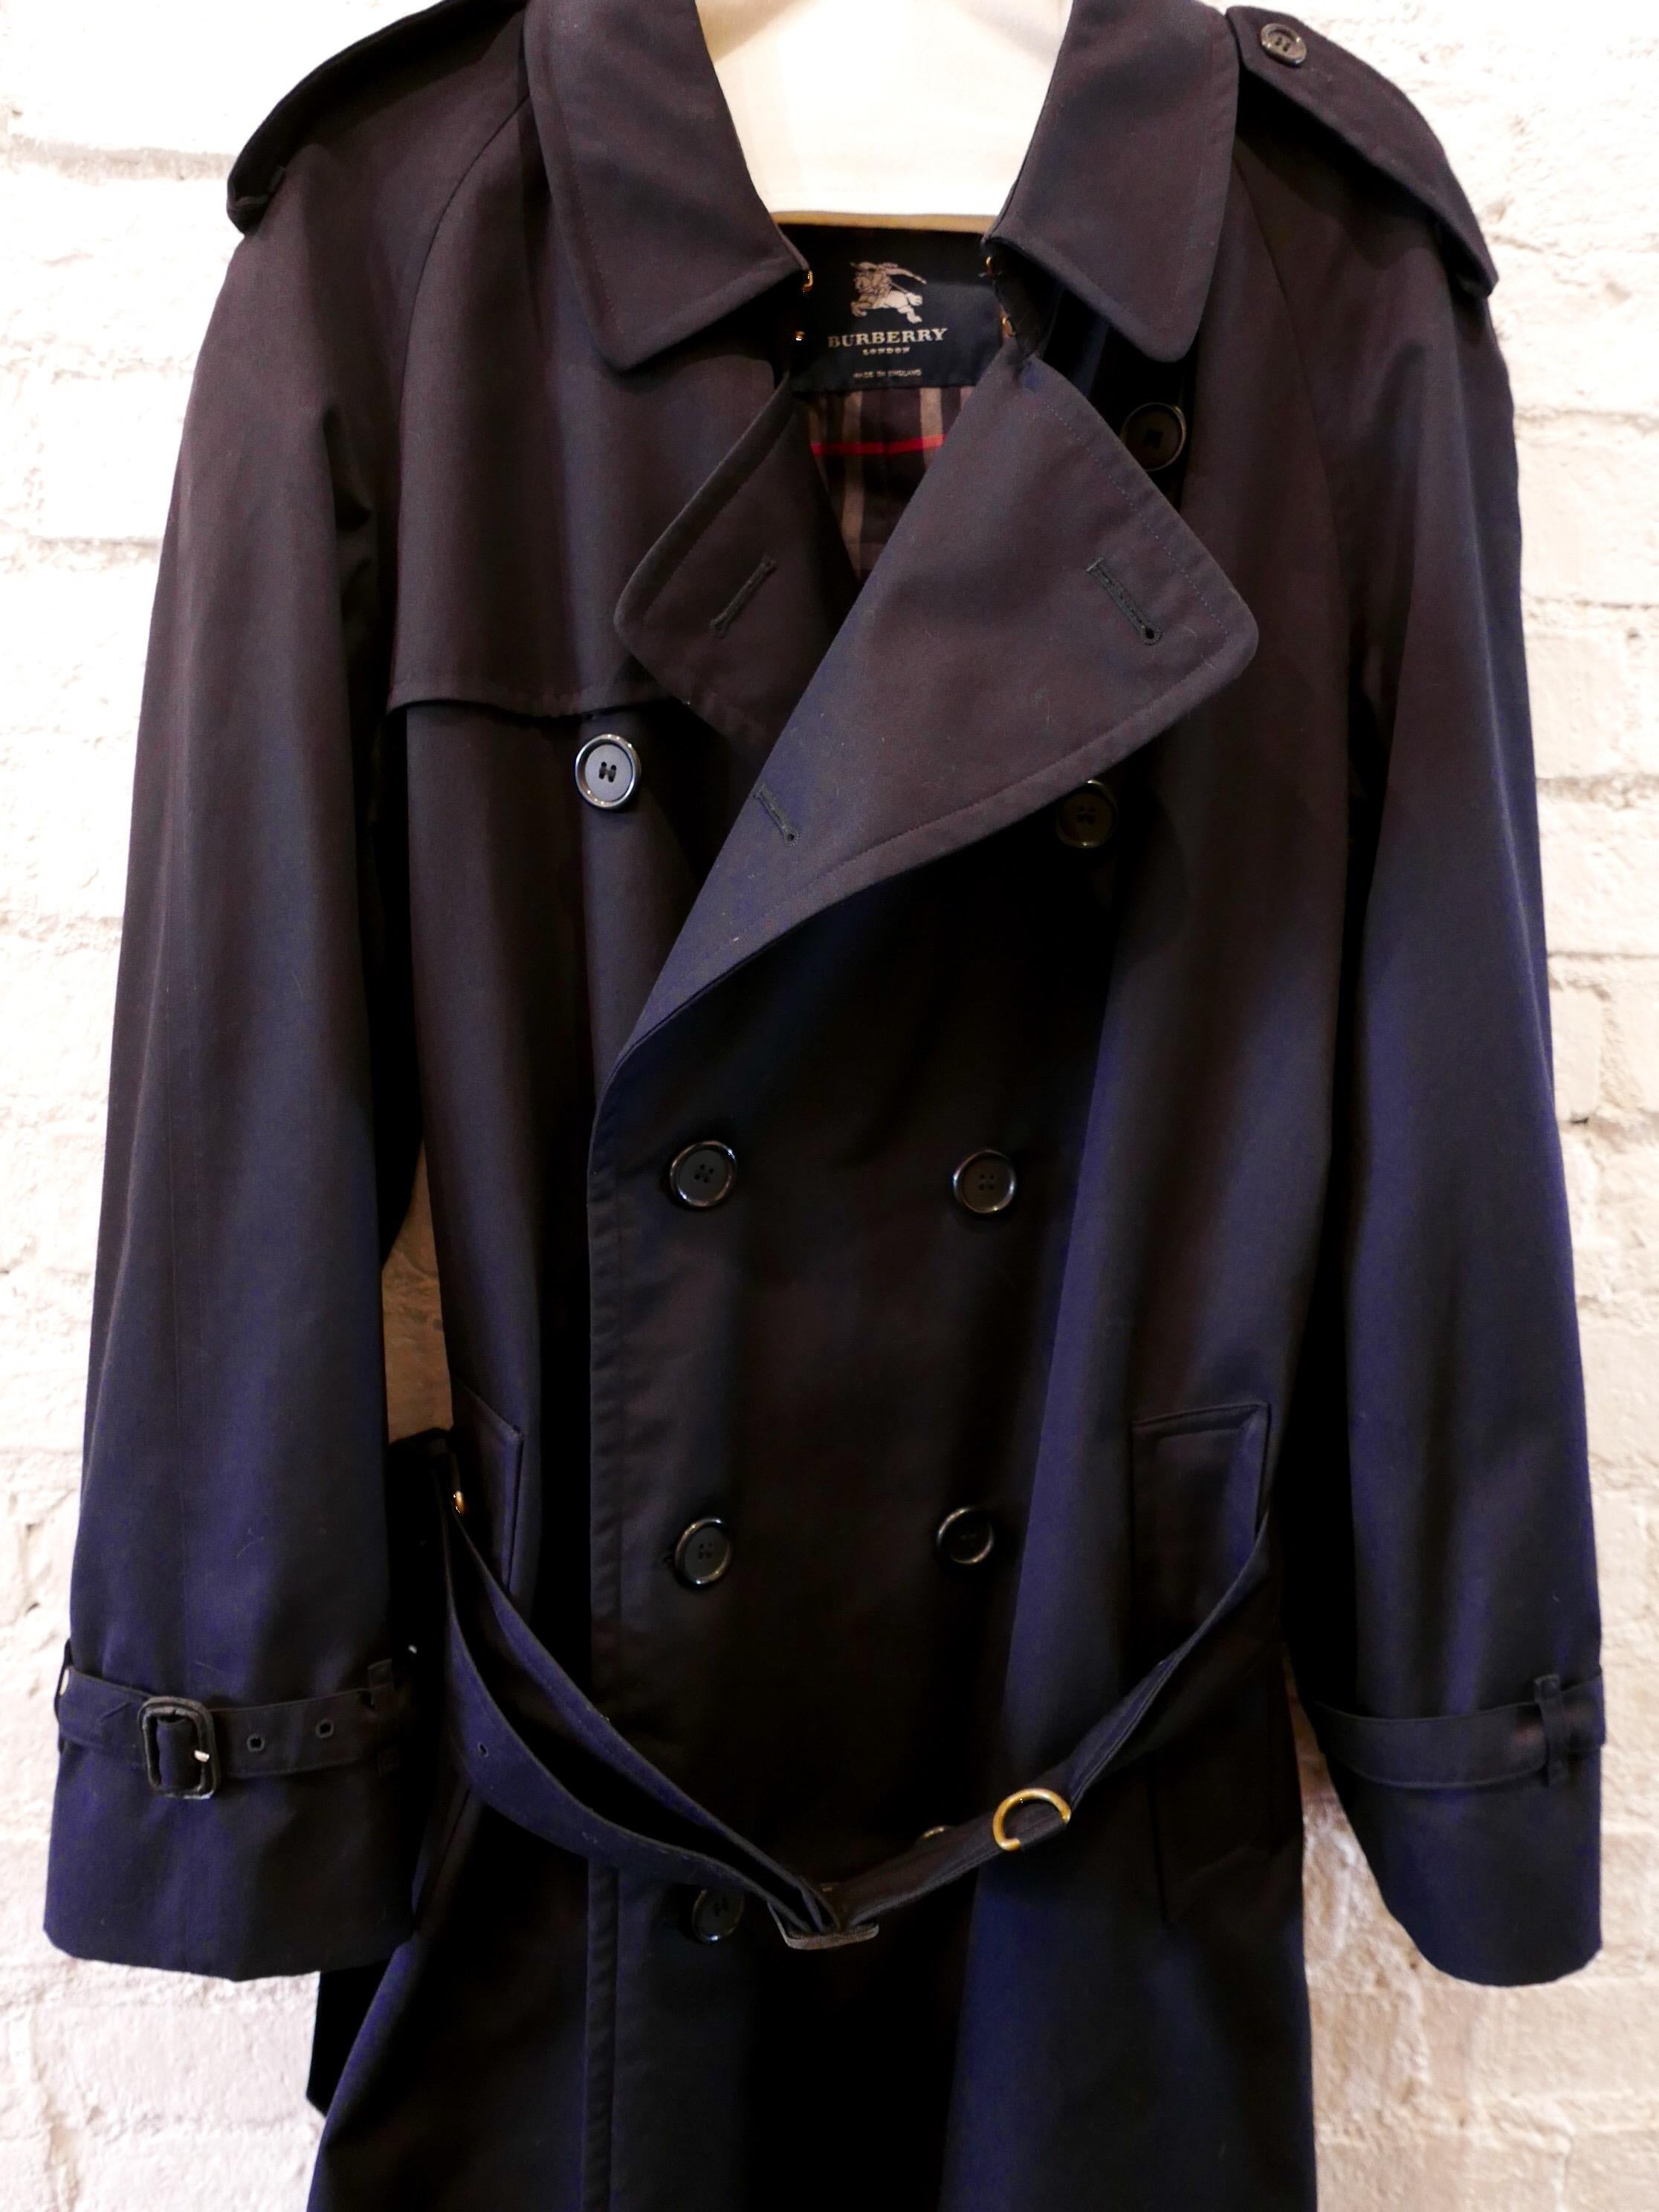 2006 Burberry Men's Navy 3/4 Length Trench Coat. Bought it London in 2006. Slightly too big and kept unworn in the closet ever since. 

Material: Polyester Cotton
Color: Navy
Origin: United Kingdom  
Size: 48R (UK)
Actual Measurements:
- chest